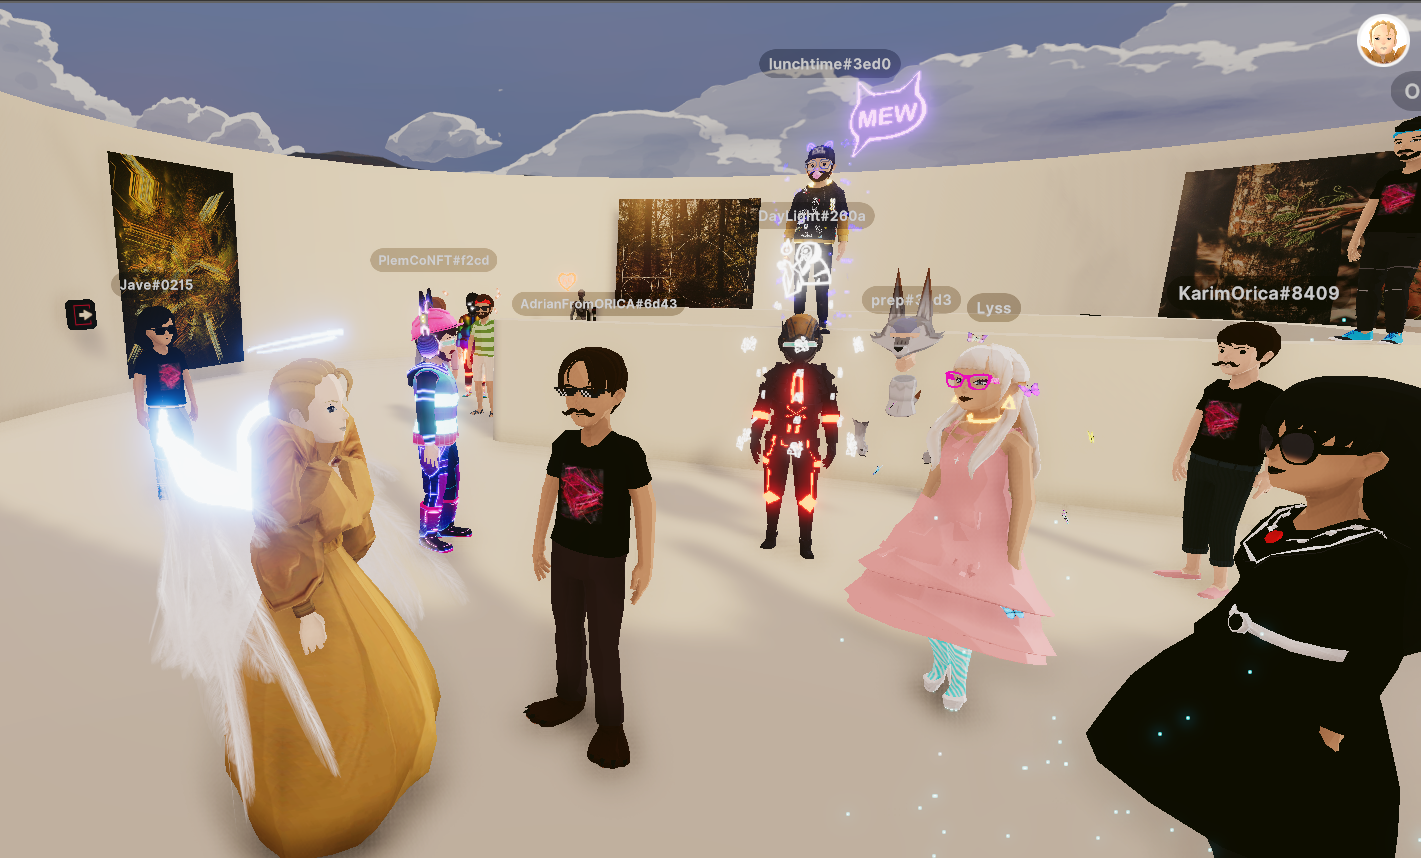 Wearable Show & Tell to take place in Decentraland